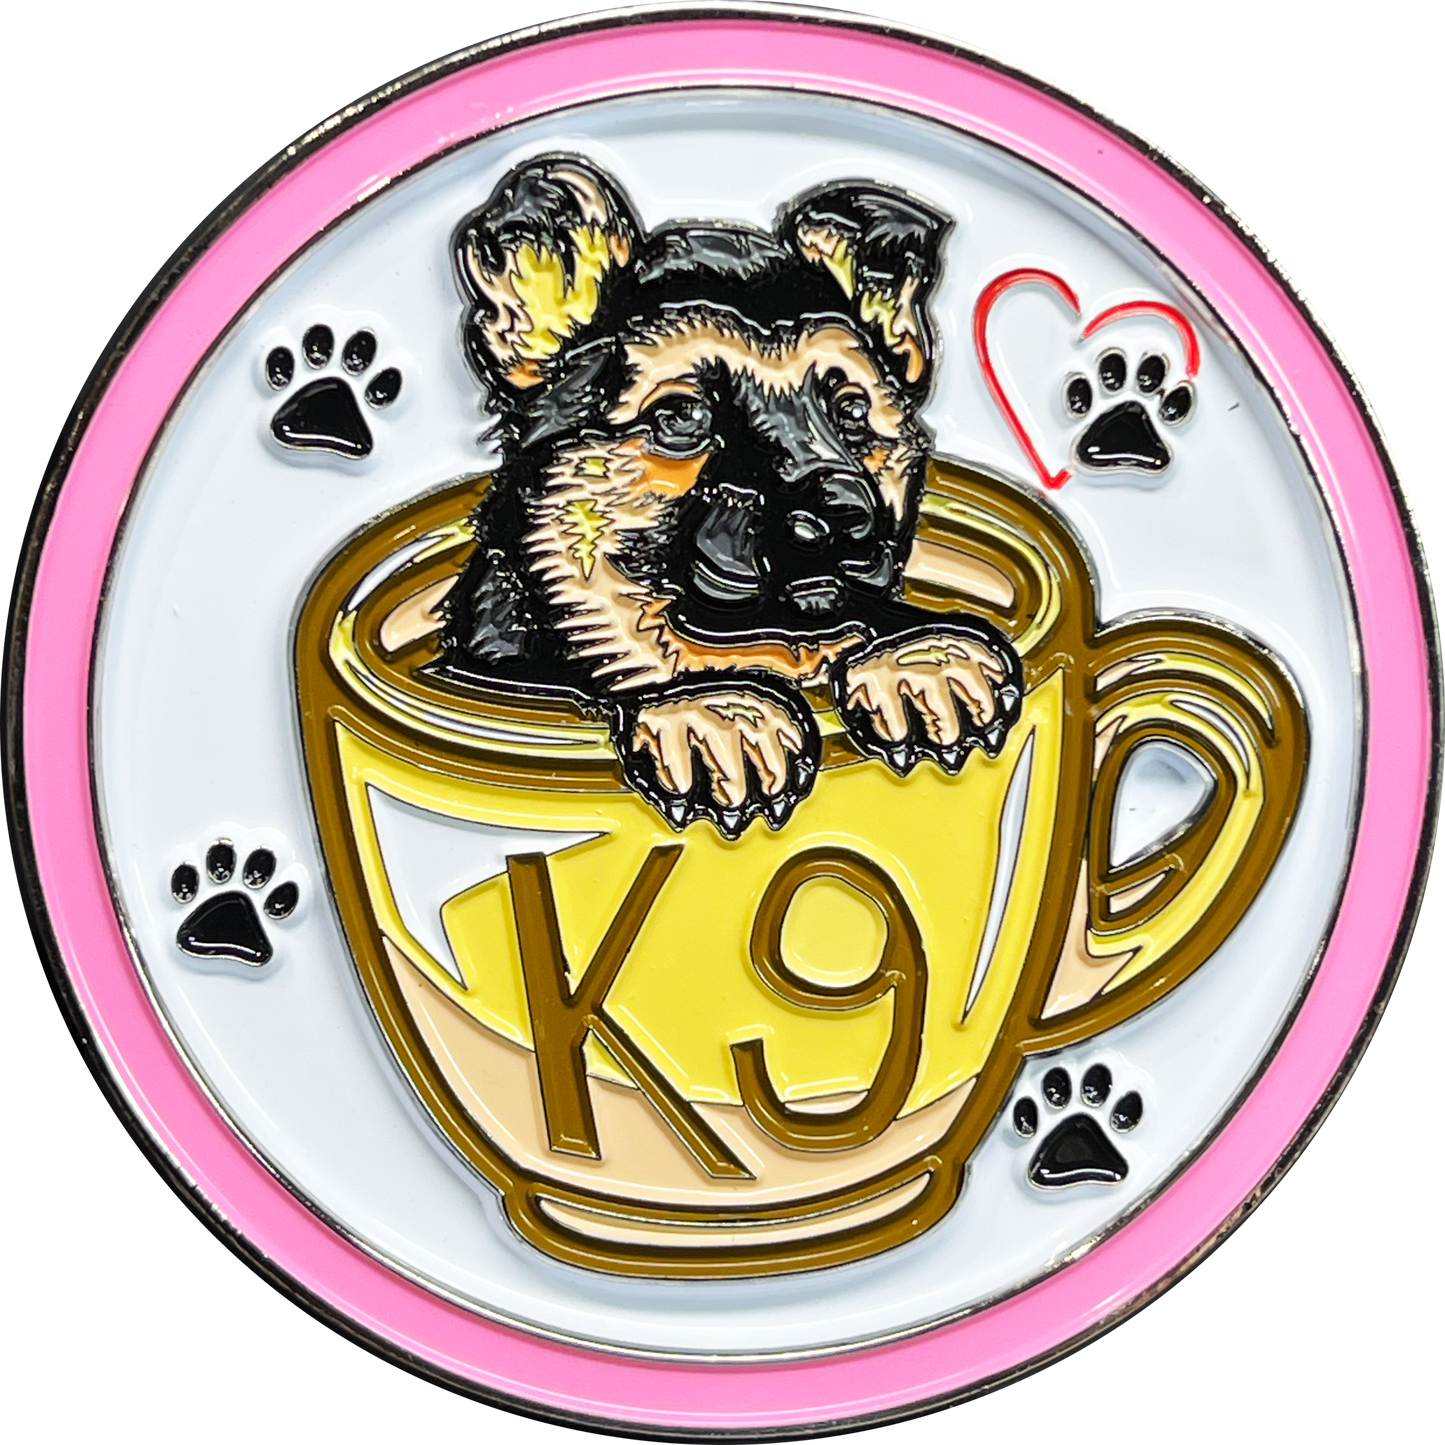 BL14-004 Cute PINK K9 Puppy in coffee mug canine challenge coin police service dog handler